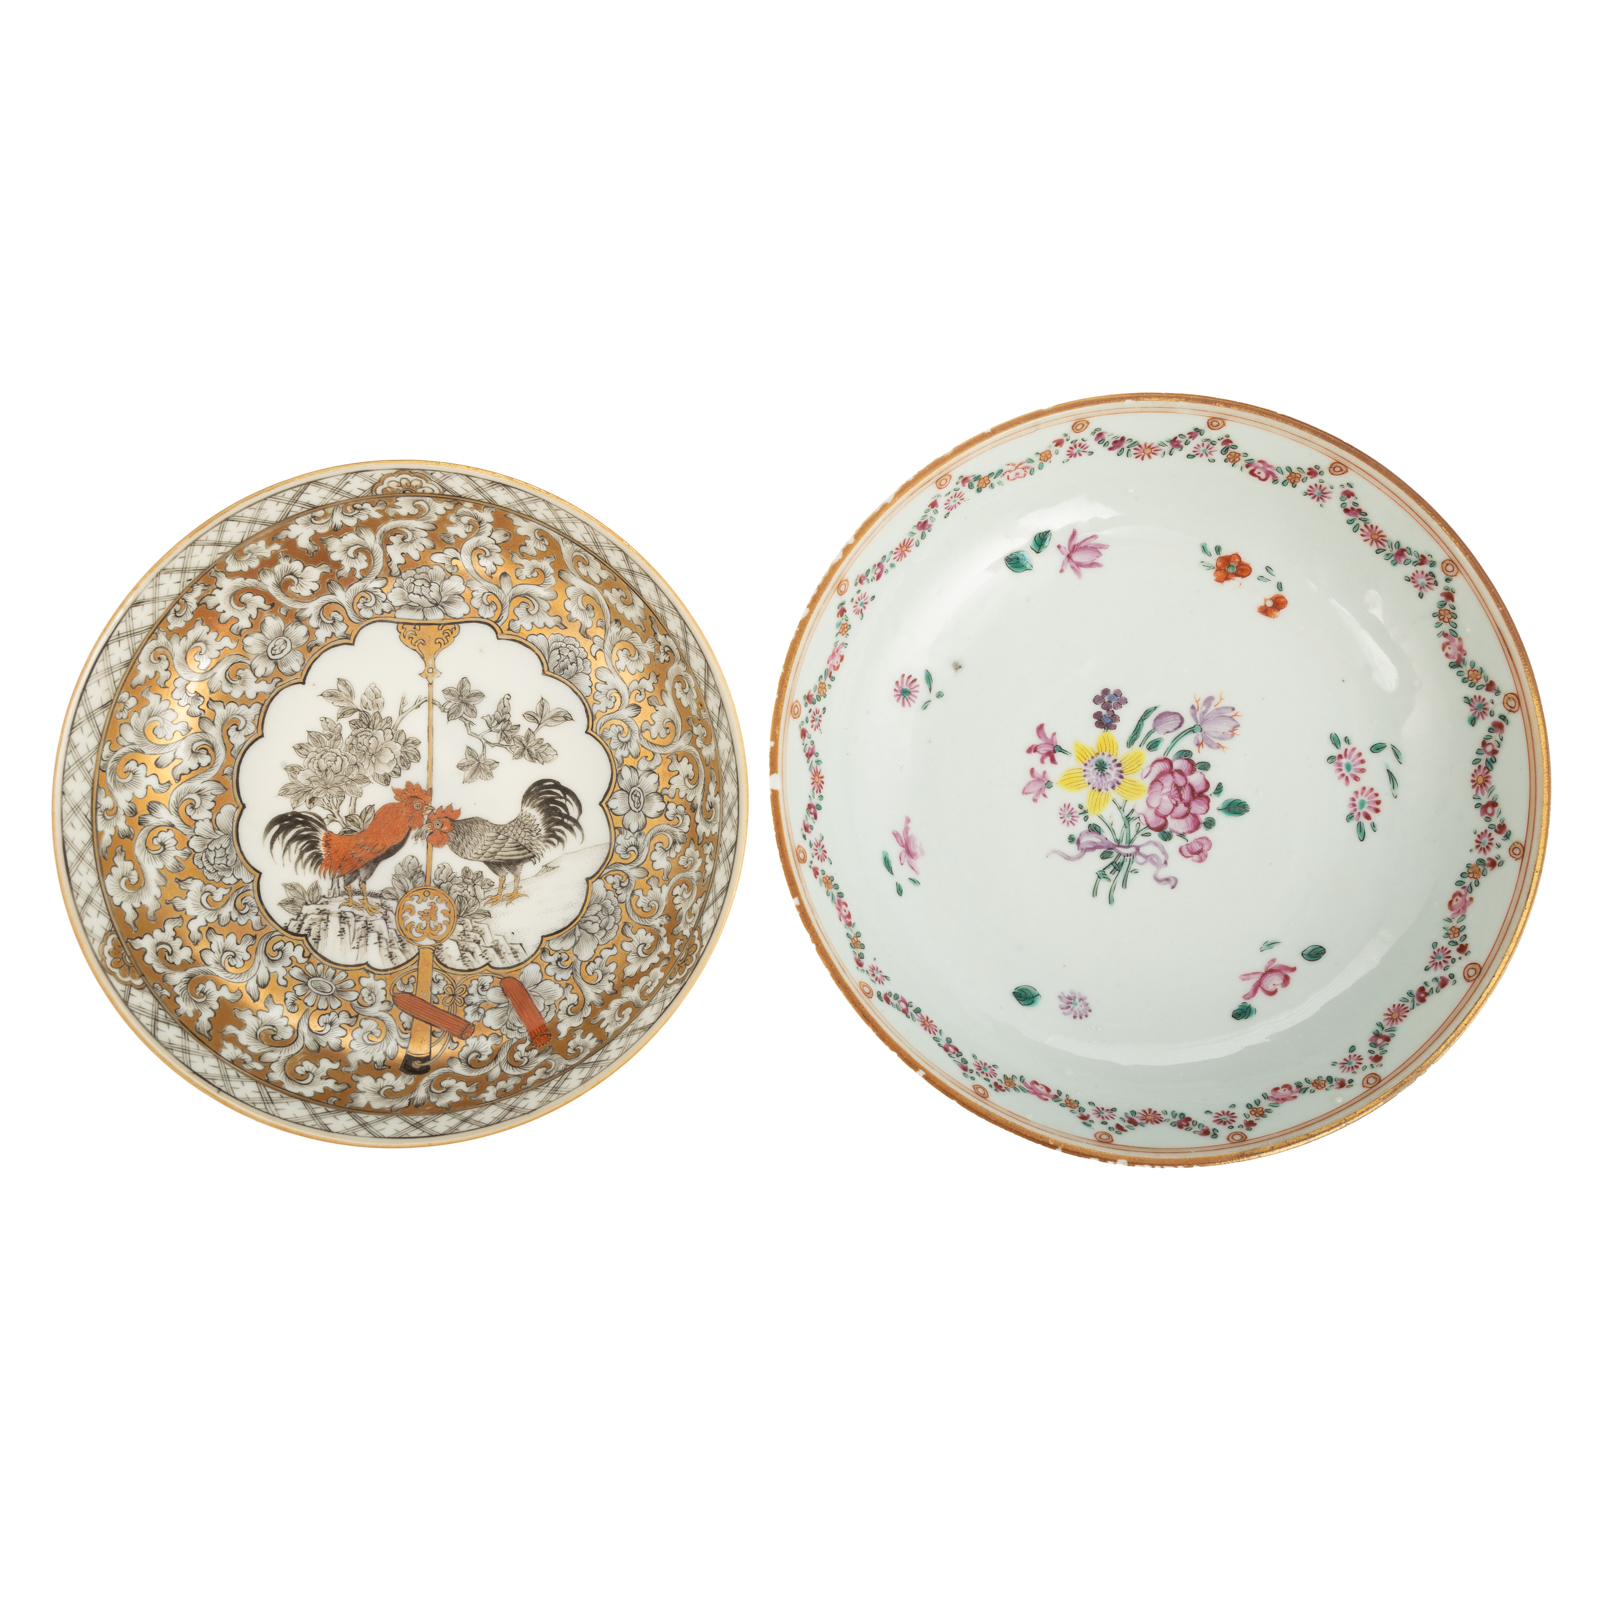 TWO CHINESE EXPORT PORCELAIN BOWLS